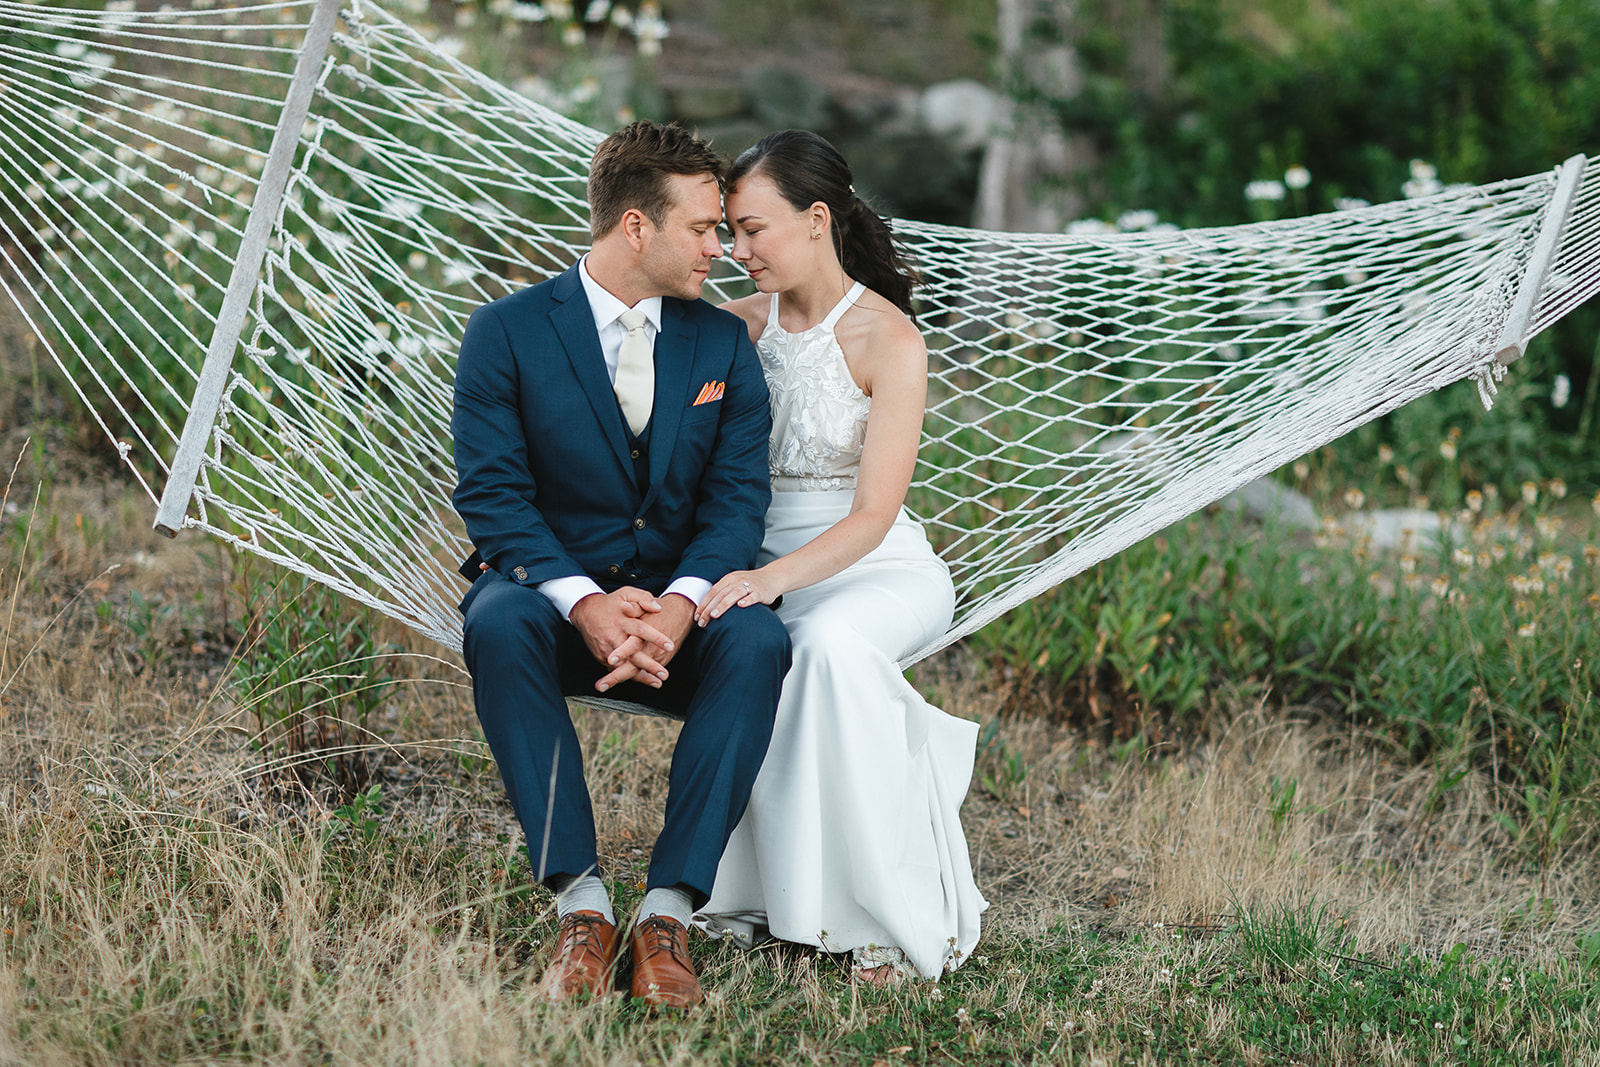 Bride and groom sharing a quiet moment sitting on a hammock.